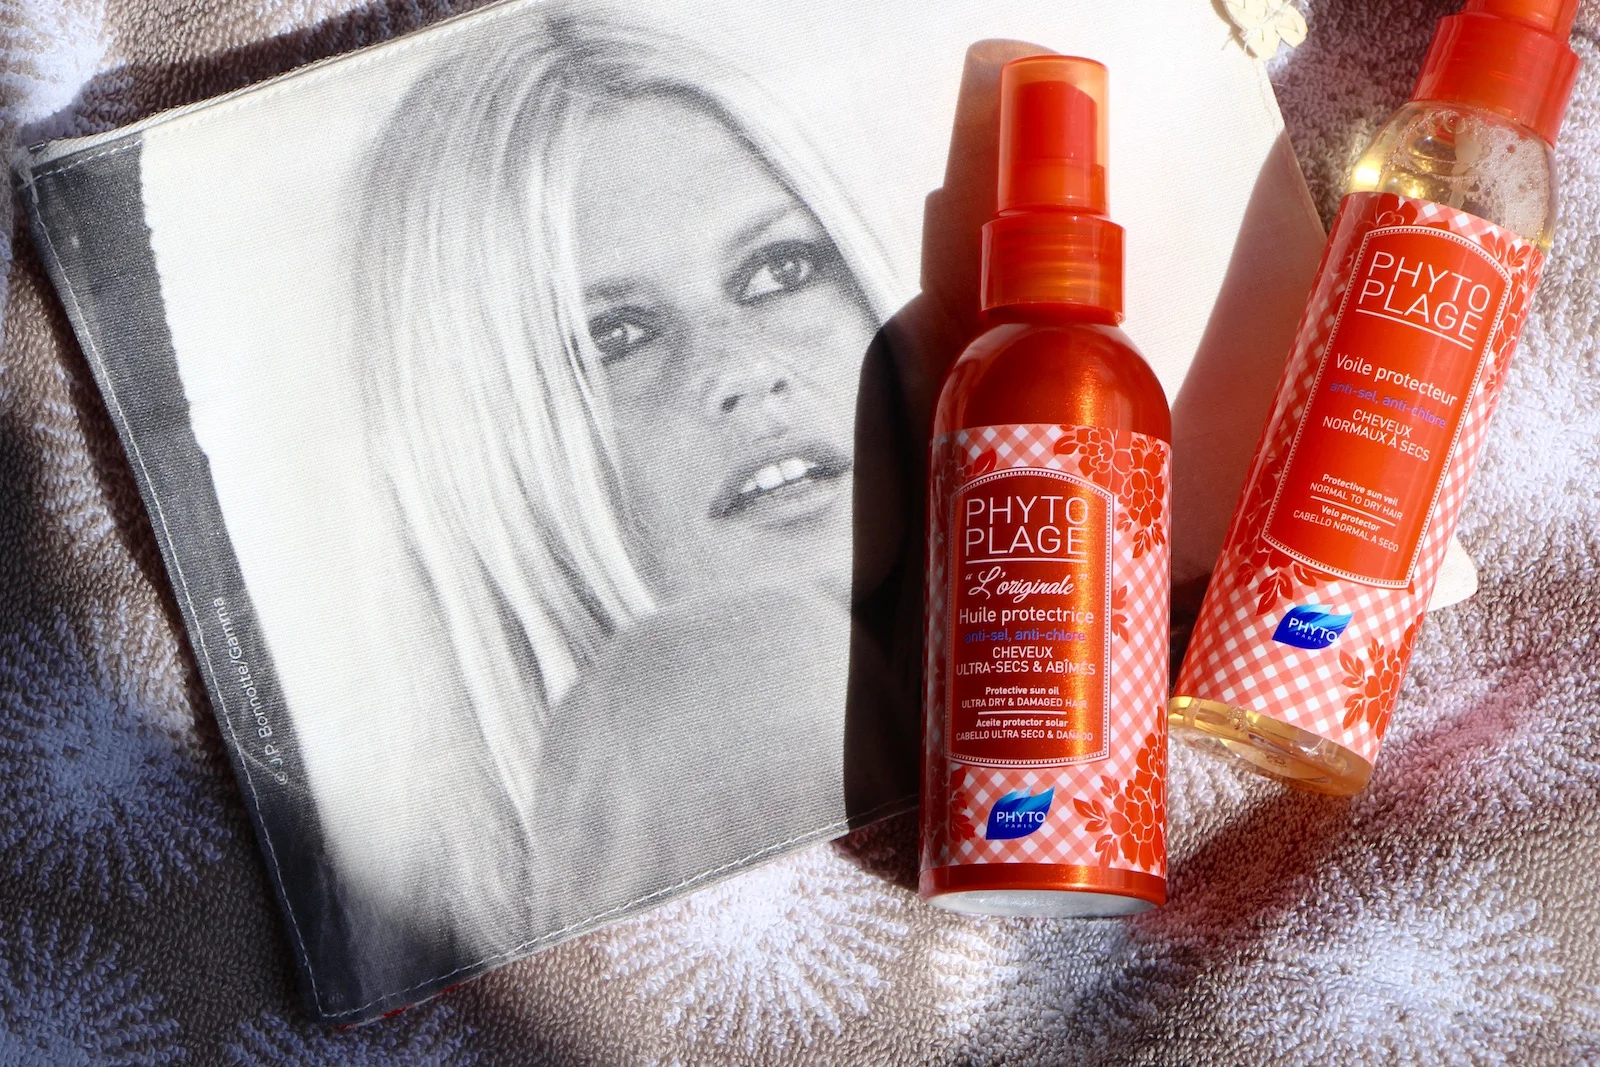 Bardot, Beach Hair and a PhytoPlage Giveaway